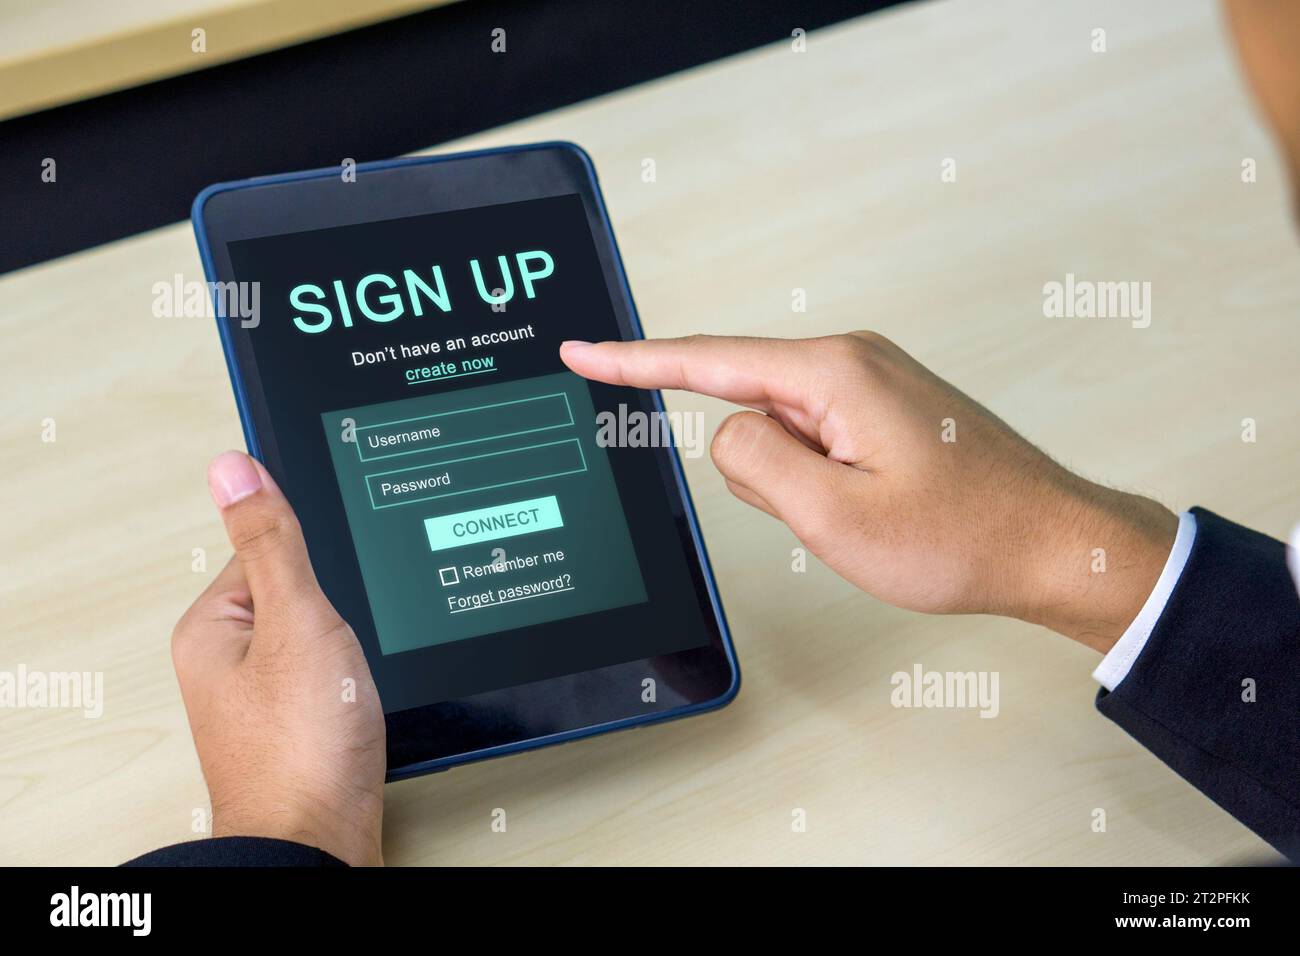 Digital Life Exploration. A focused businessman in black suit engrossed in creating his identity online, registering for an account on his tablet comp Stock Photo